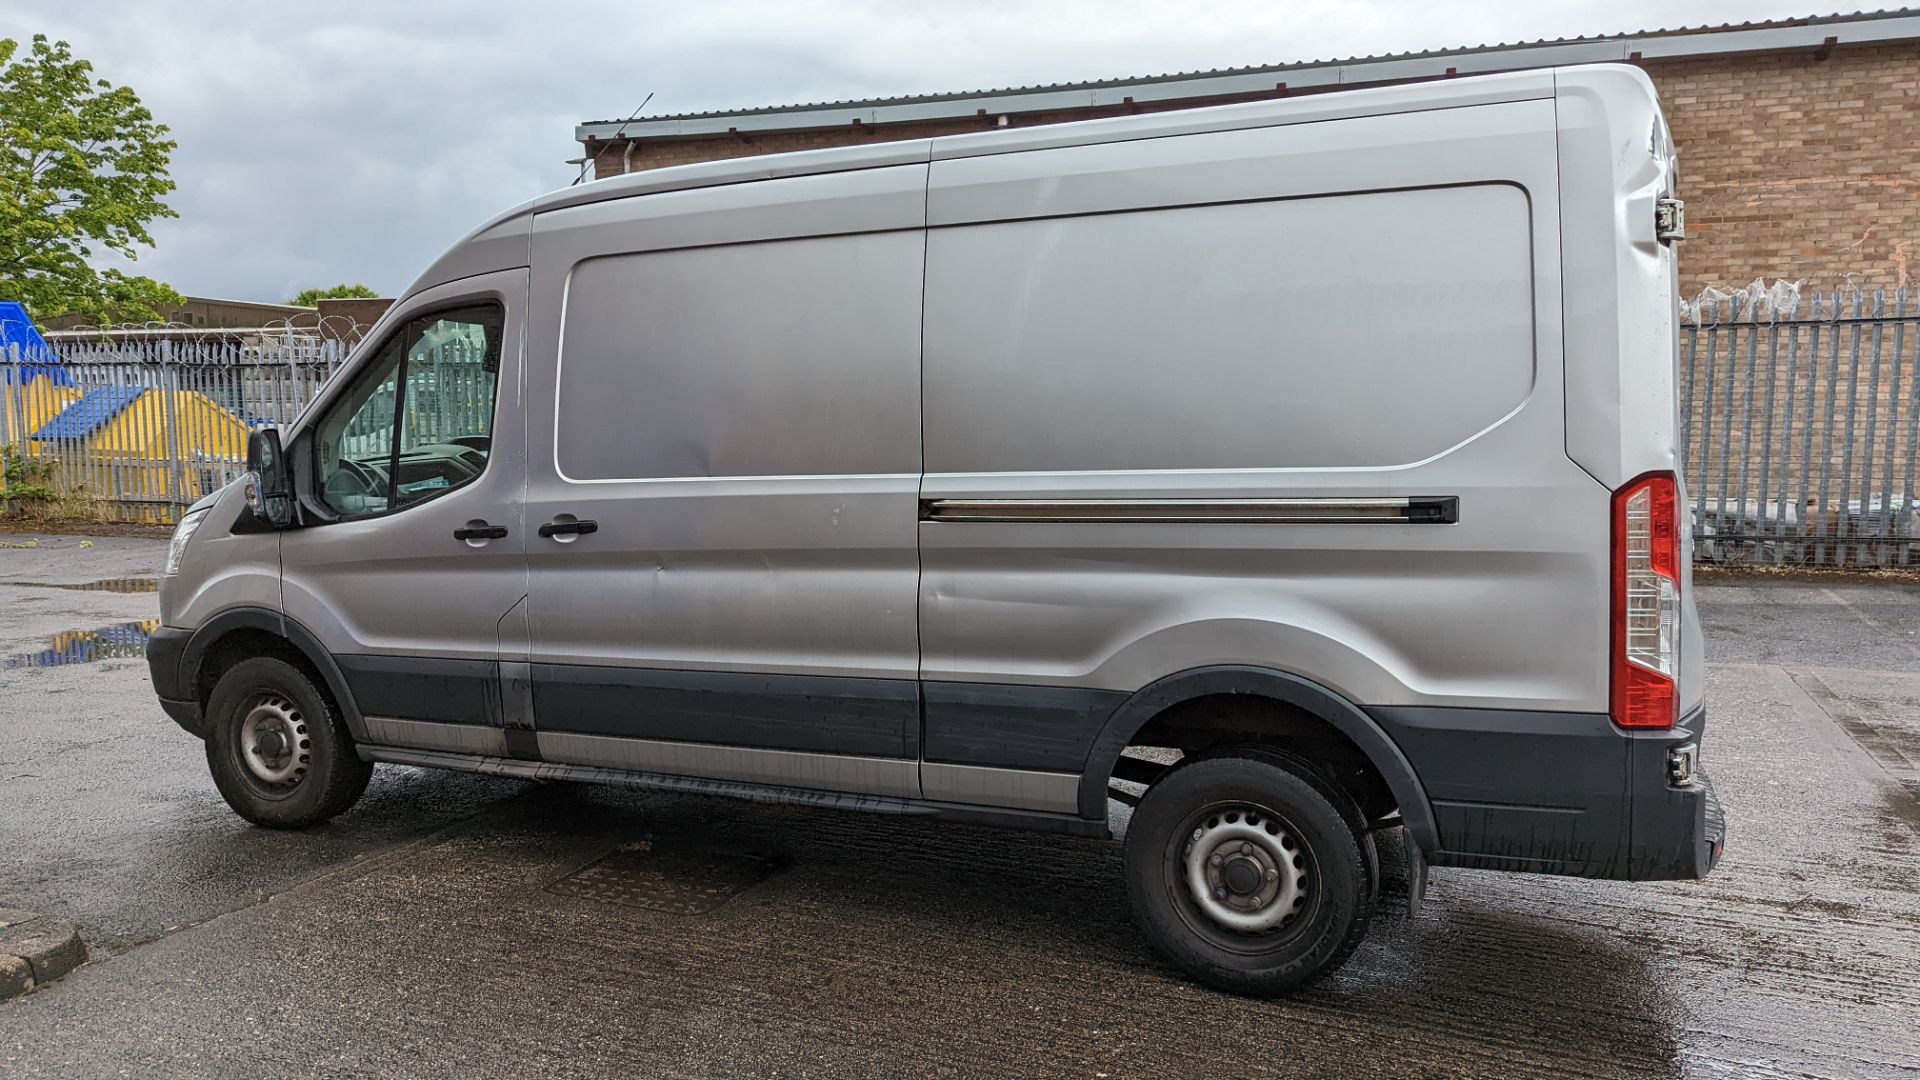 MD65 WHH Ford Transit 350, 6-speed manual gearbox, 2198cc diesel engine, 5981mm x 2550mm. Colour: Si - Image 14 of 51